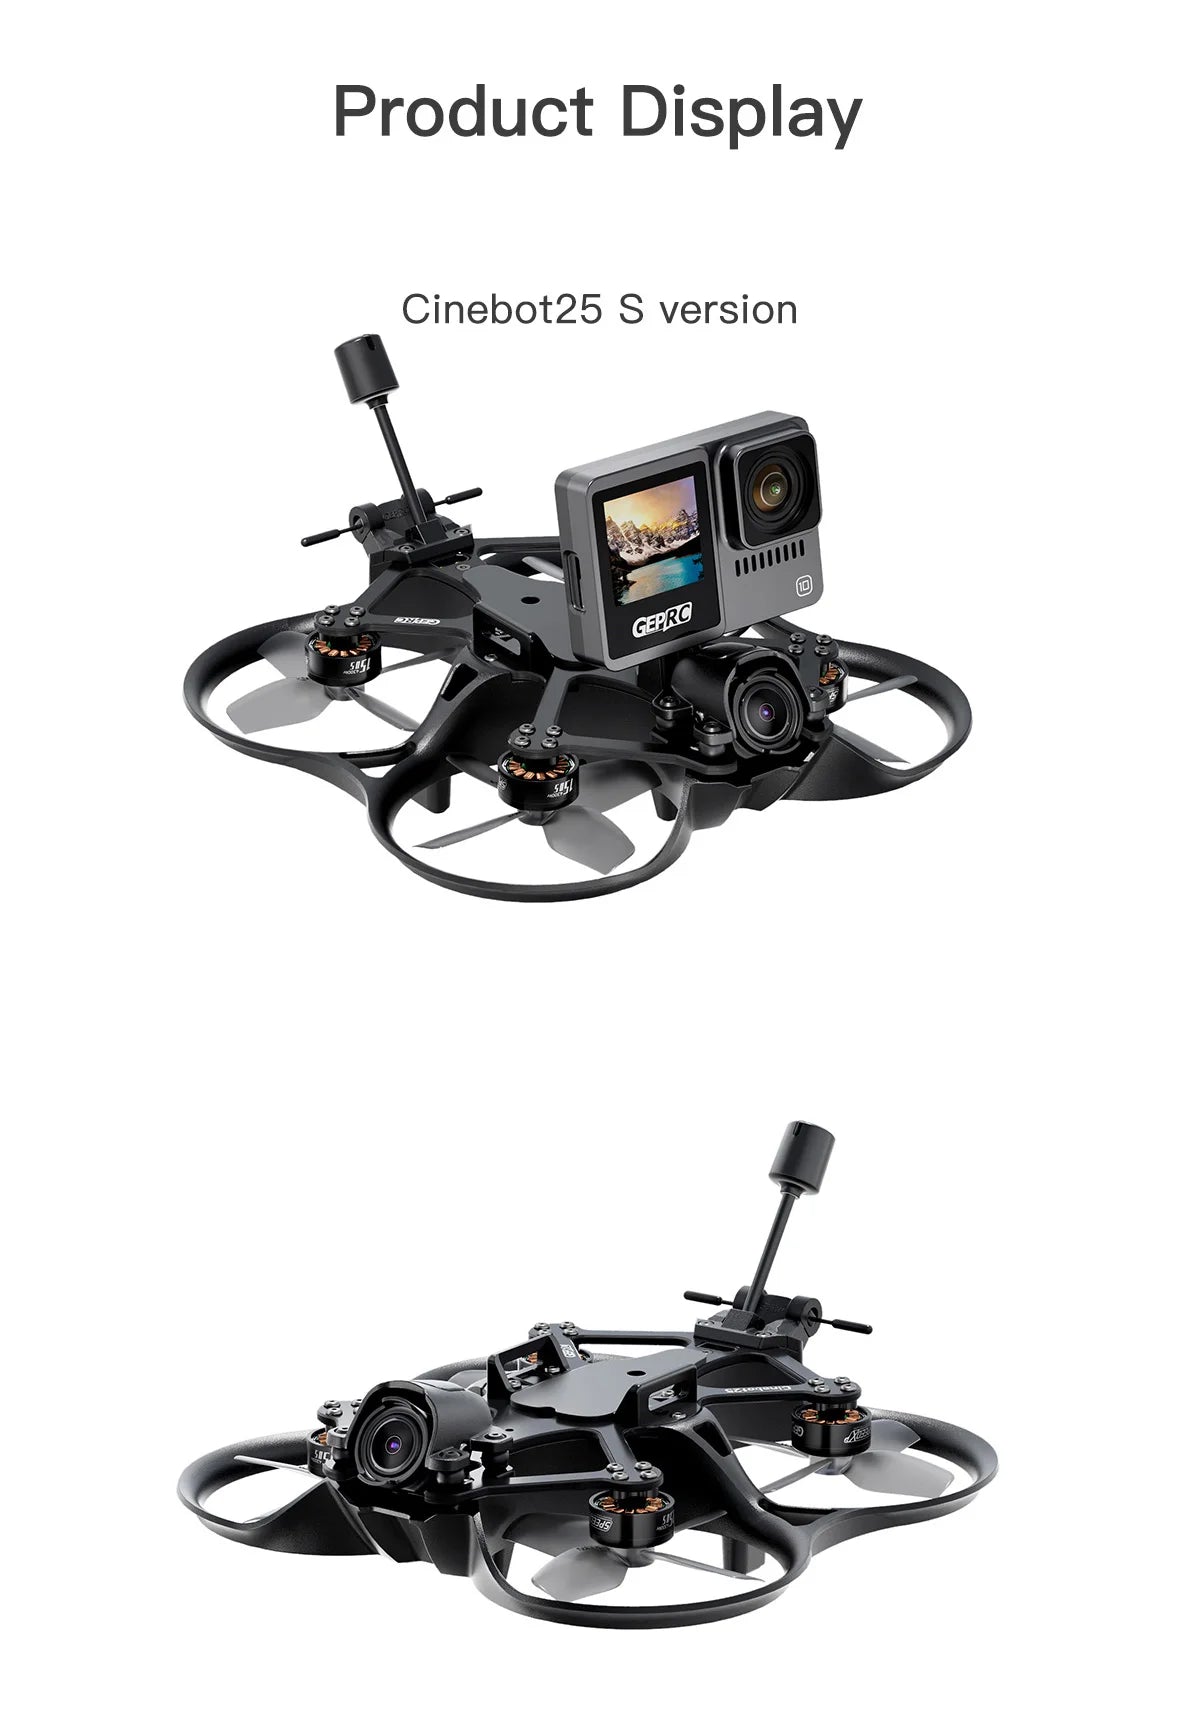 GEPRC Cinebot25 HD Wasp FPV Drone, GEPRO Cinebot25 S version S451 